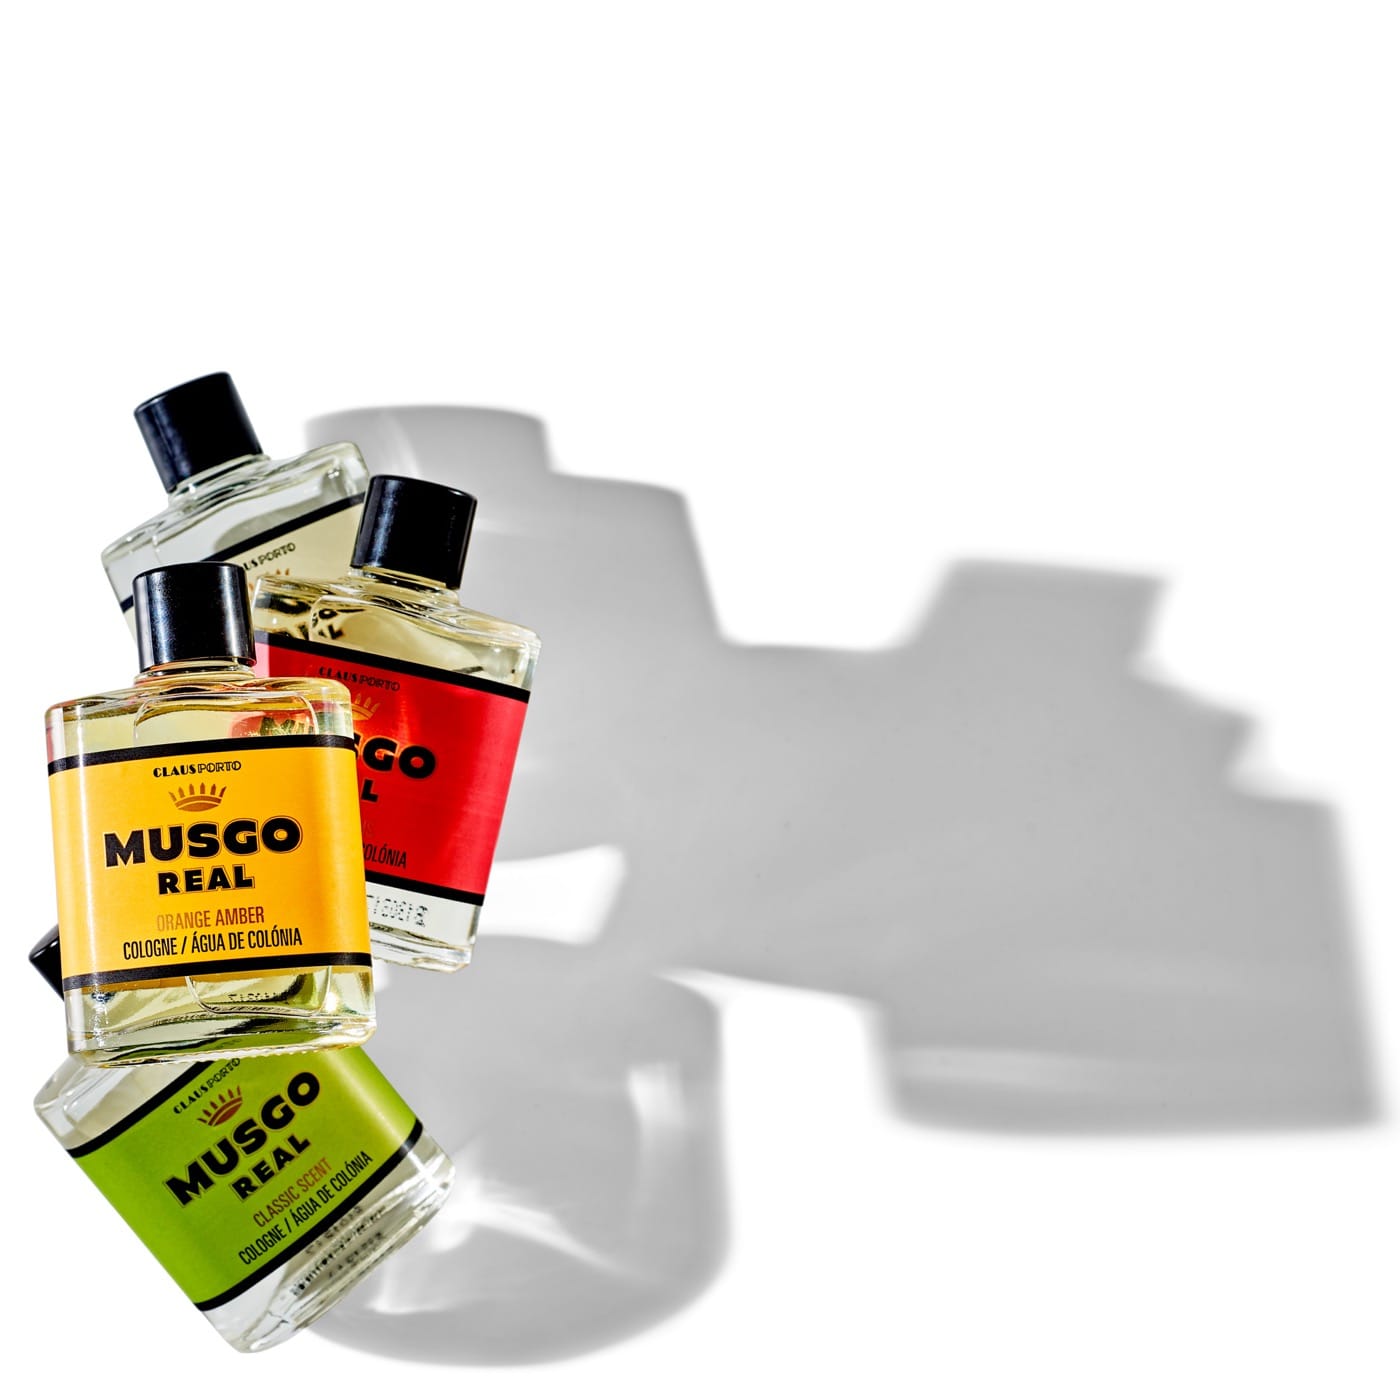 Musgo Real Gift Box Cologne 4x30ml - 3.2 - MR-CBX001